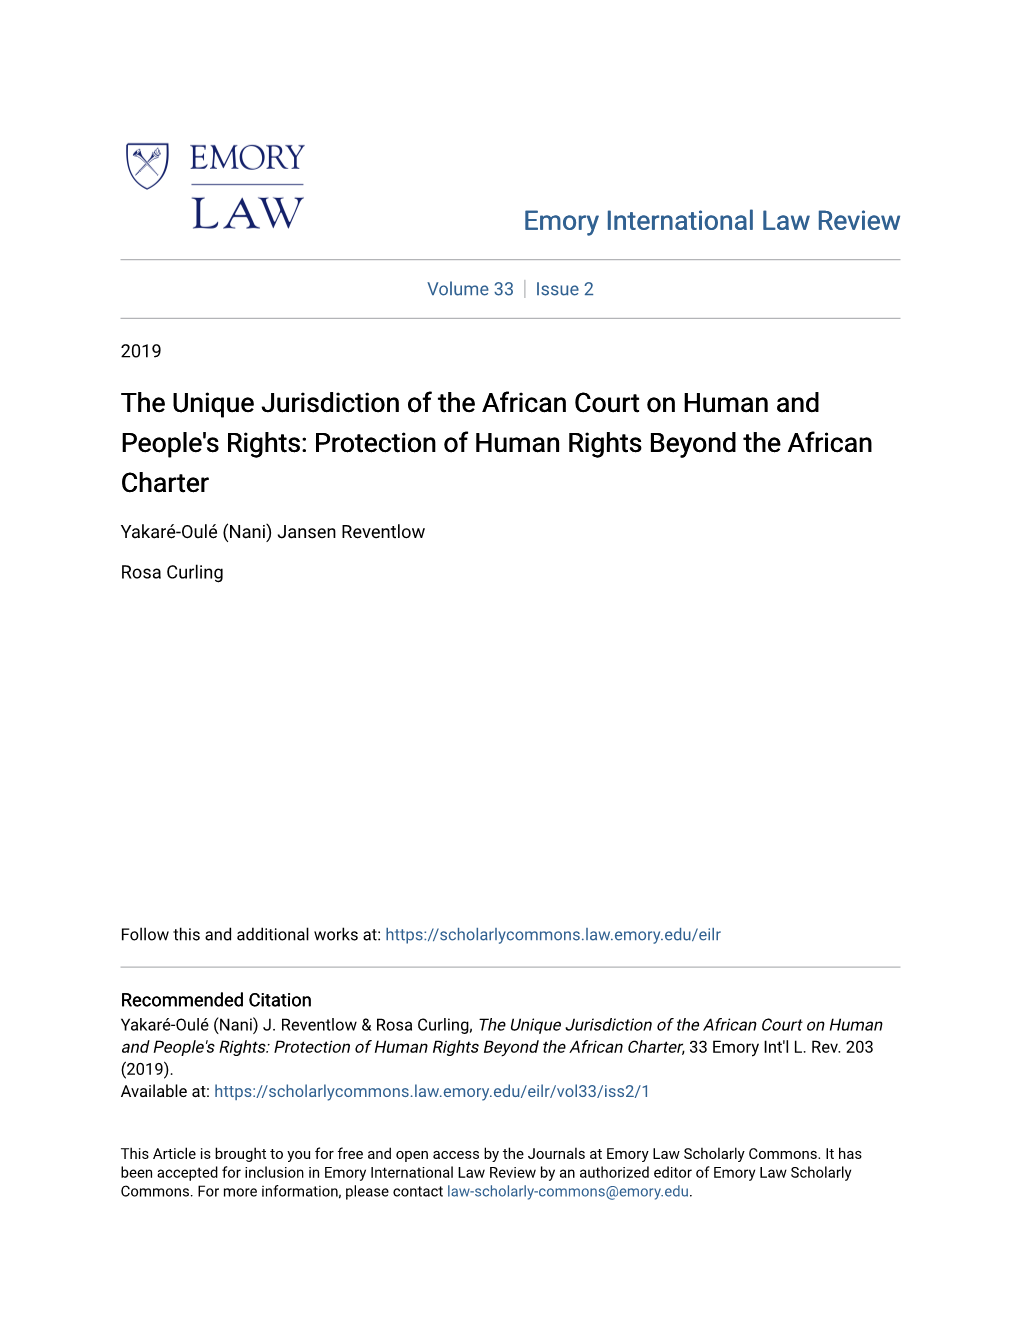 The Unique Jurisdiction of the African Court on Human and People's Rights: Protection of Human Rights Beyond the African Charter